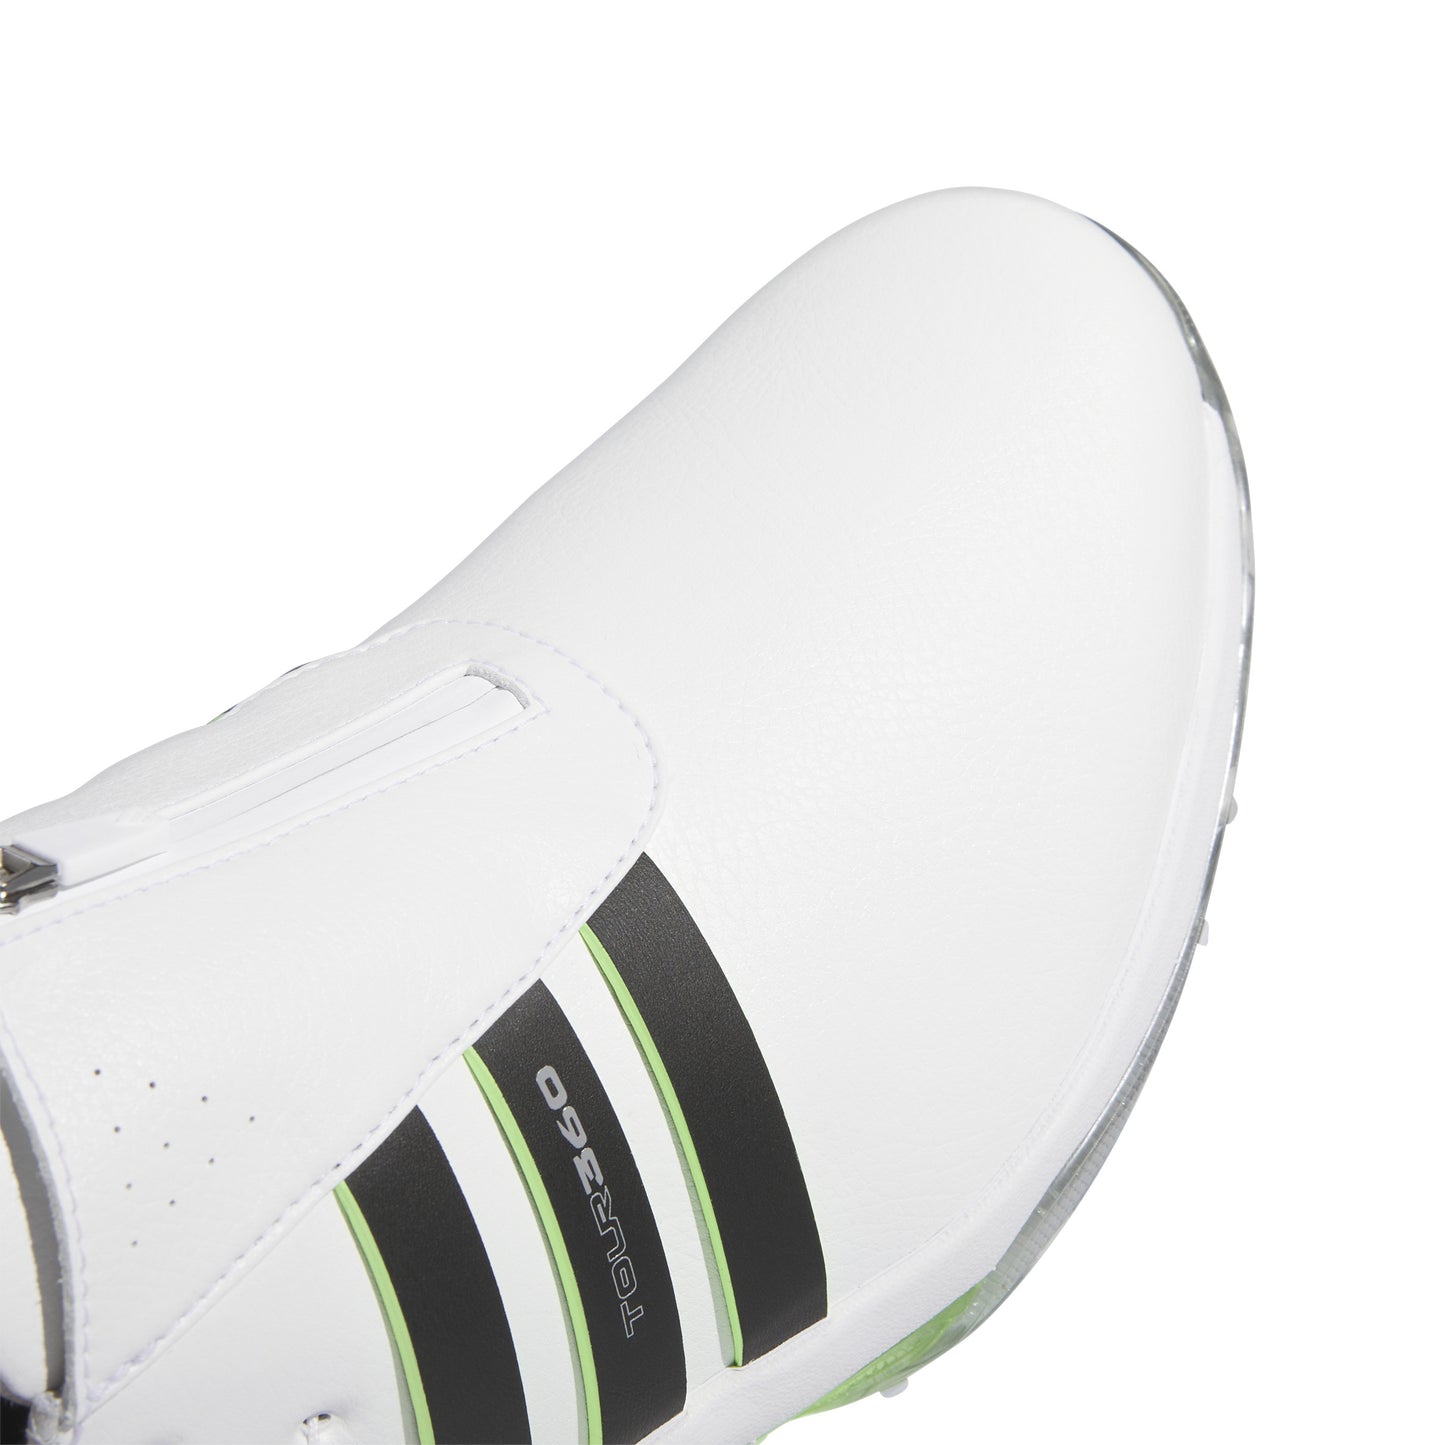 ADIDAS TOUR360 BOA 24 BOOST WIDE GOLF SHOES